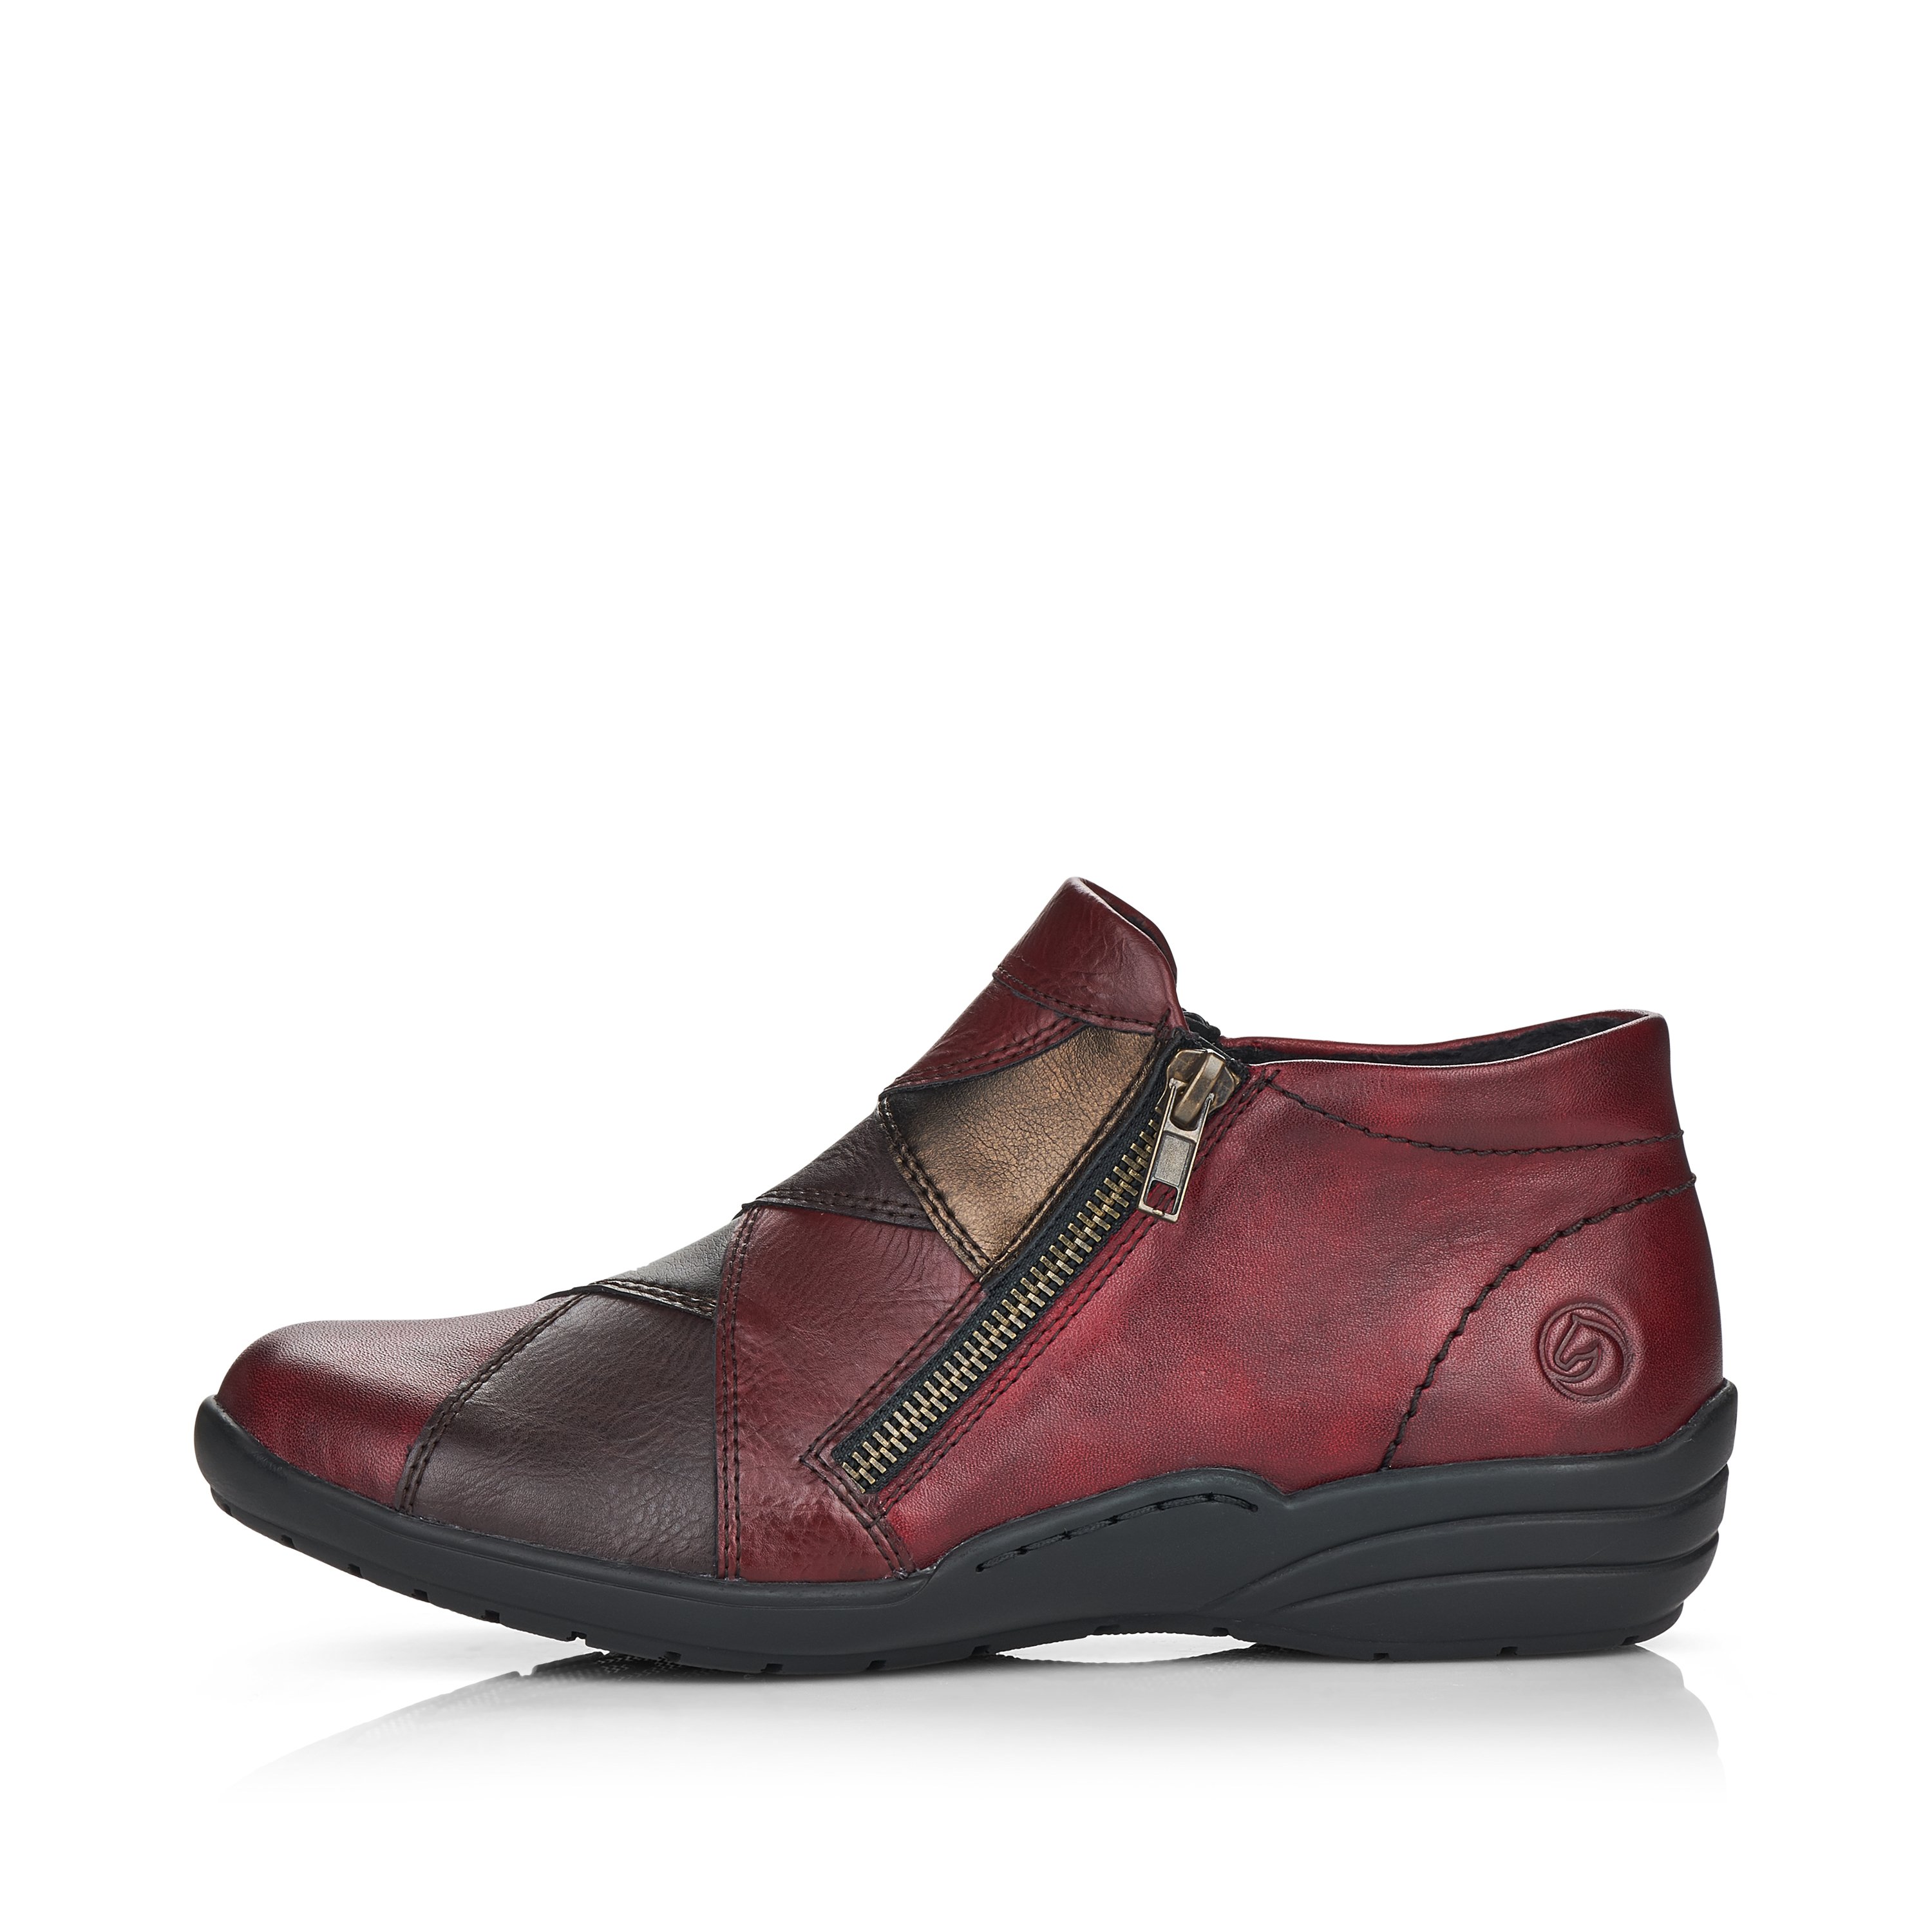 Dark red remonte women´s slippers R7674-36 with a zipper as well as light sole. The outside of the shoe